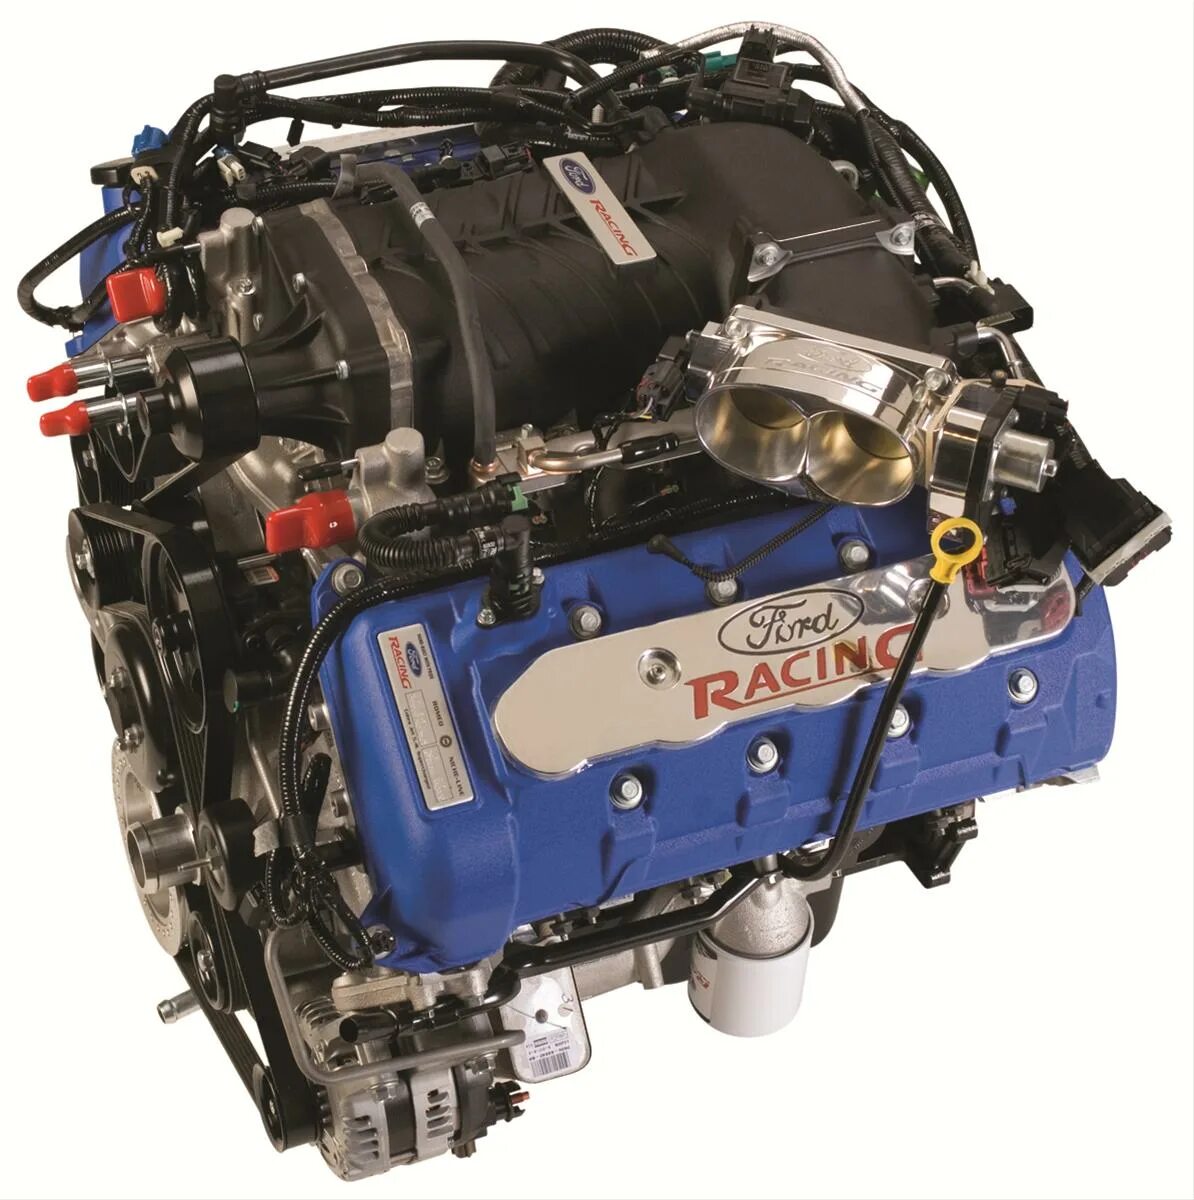 Ford 380 Motor. Switzer Ford Racing двигатель. Ford Performance движок. Ford Racing Performance Part. Модели двигателей форд